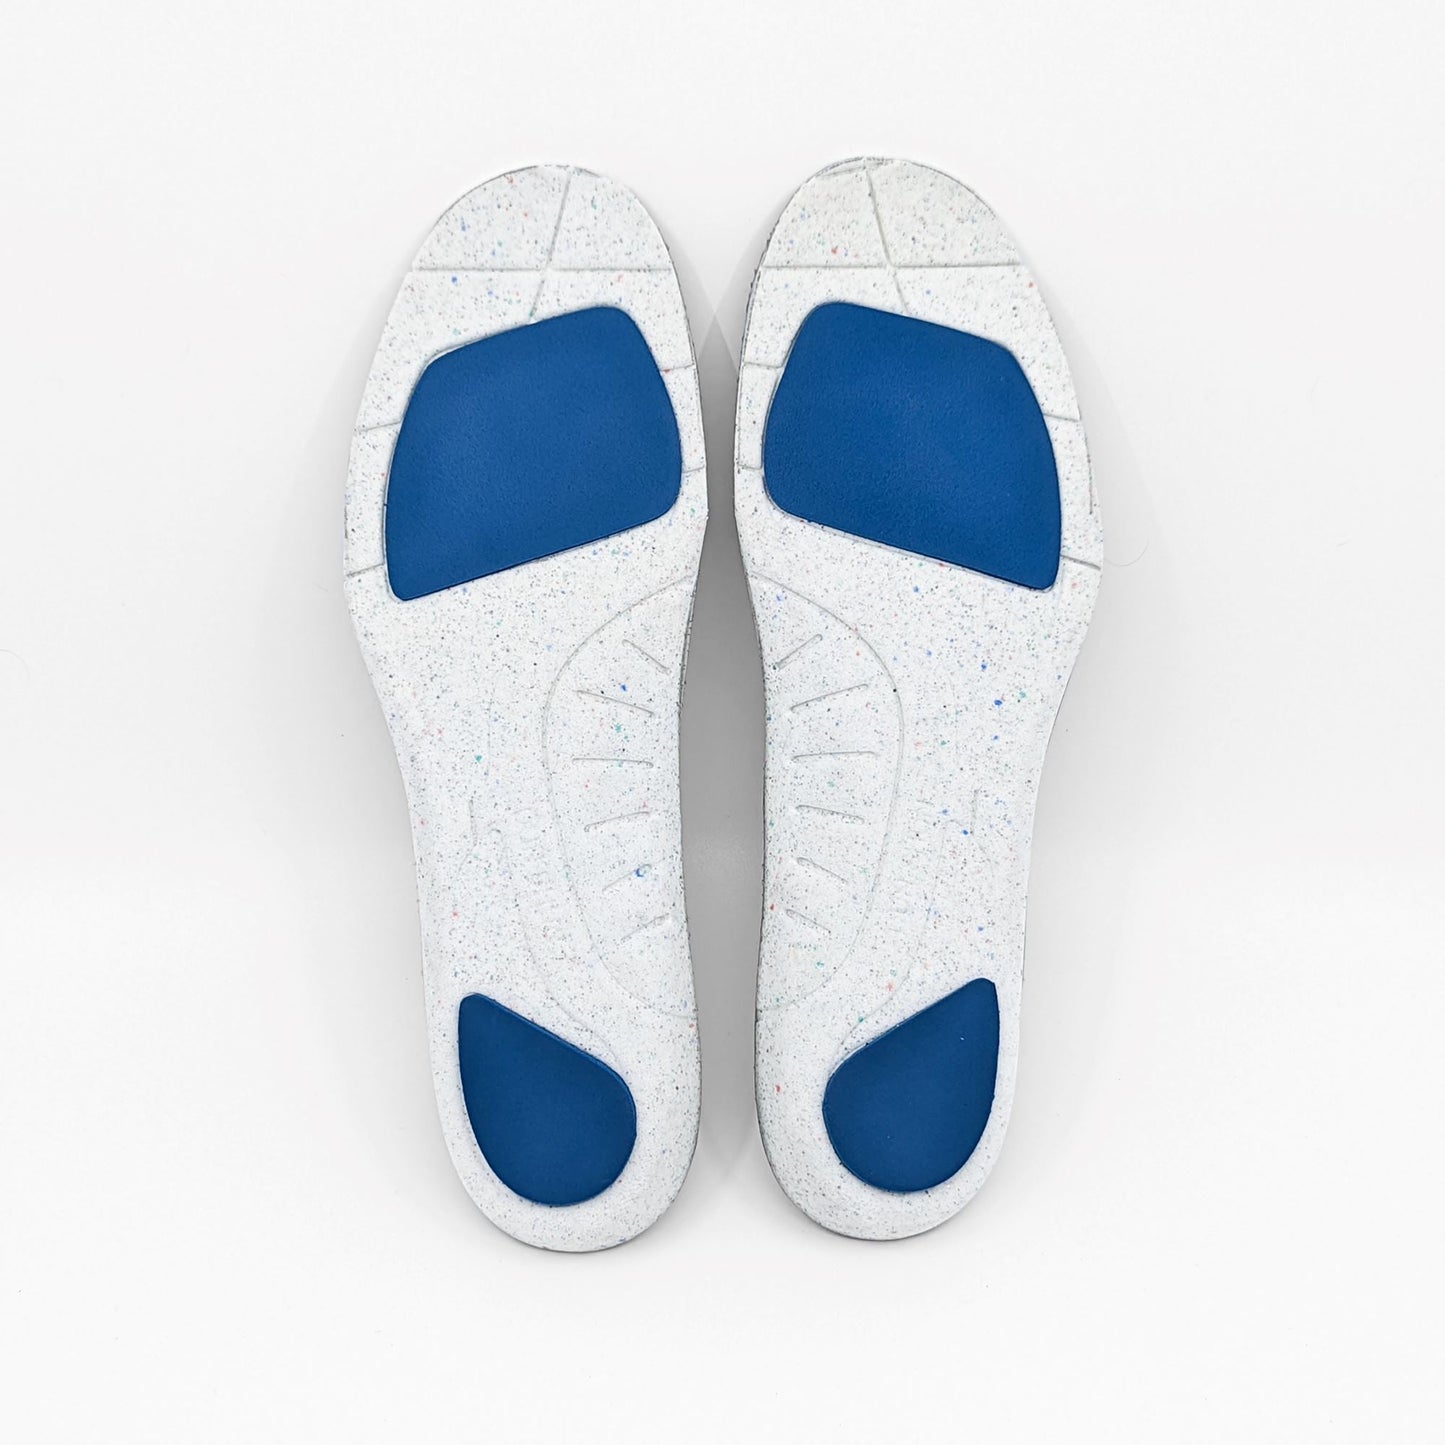 Photo of the recyclable, custom removable insoles.